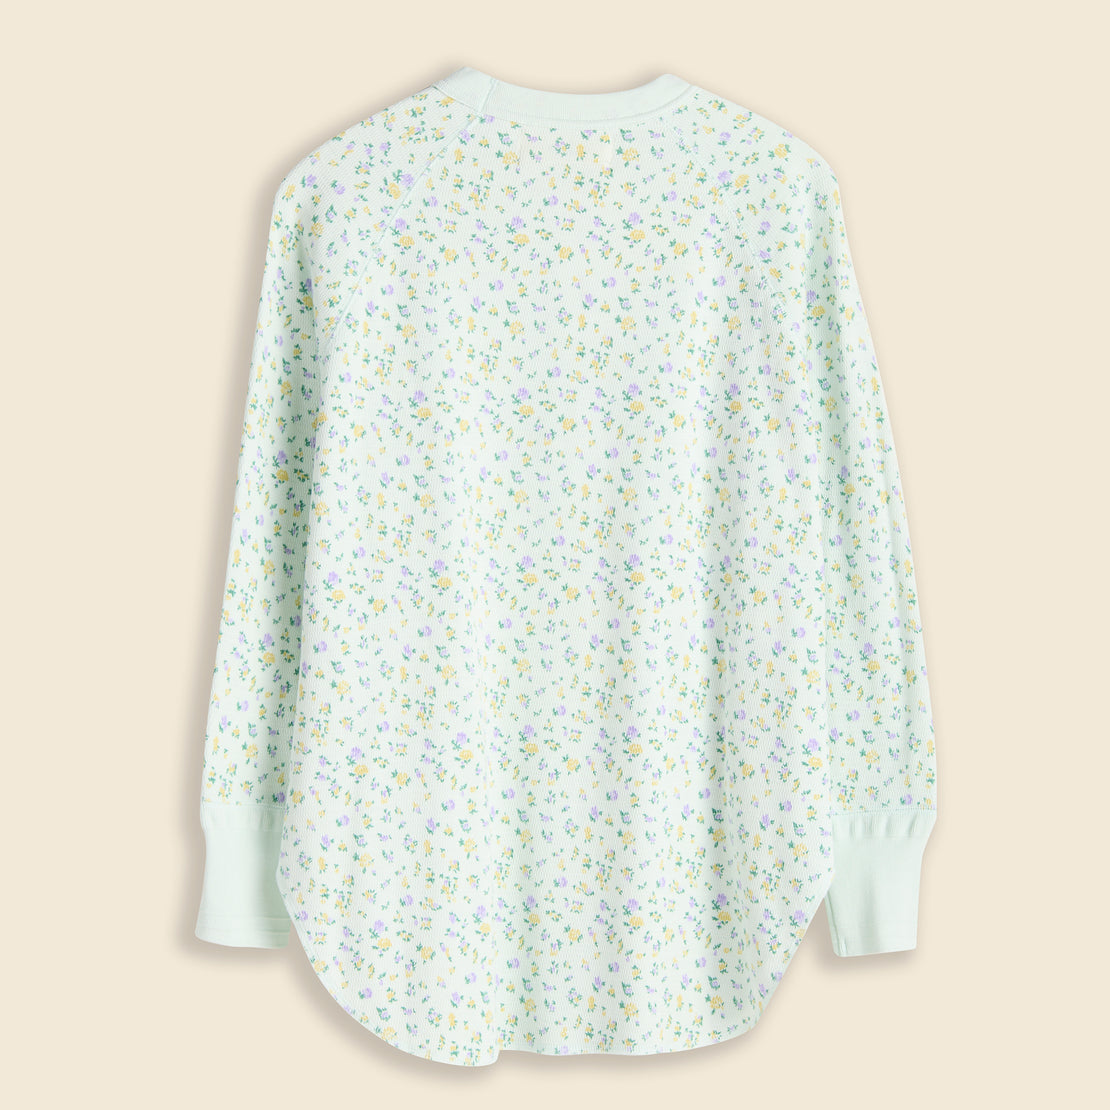 Floral Thermal L/S - Mint Green - BEAMS BOY - STAG Provisions - W - Tops - L/S Knit